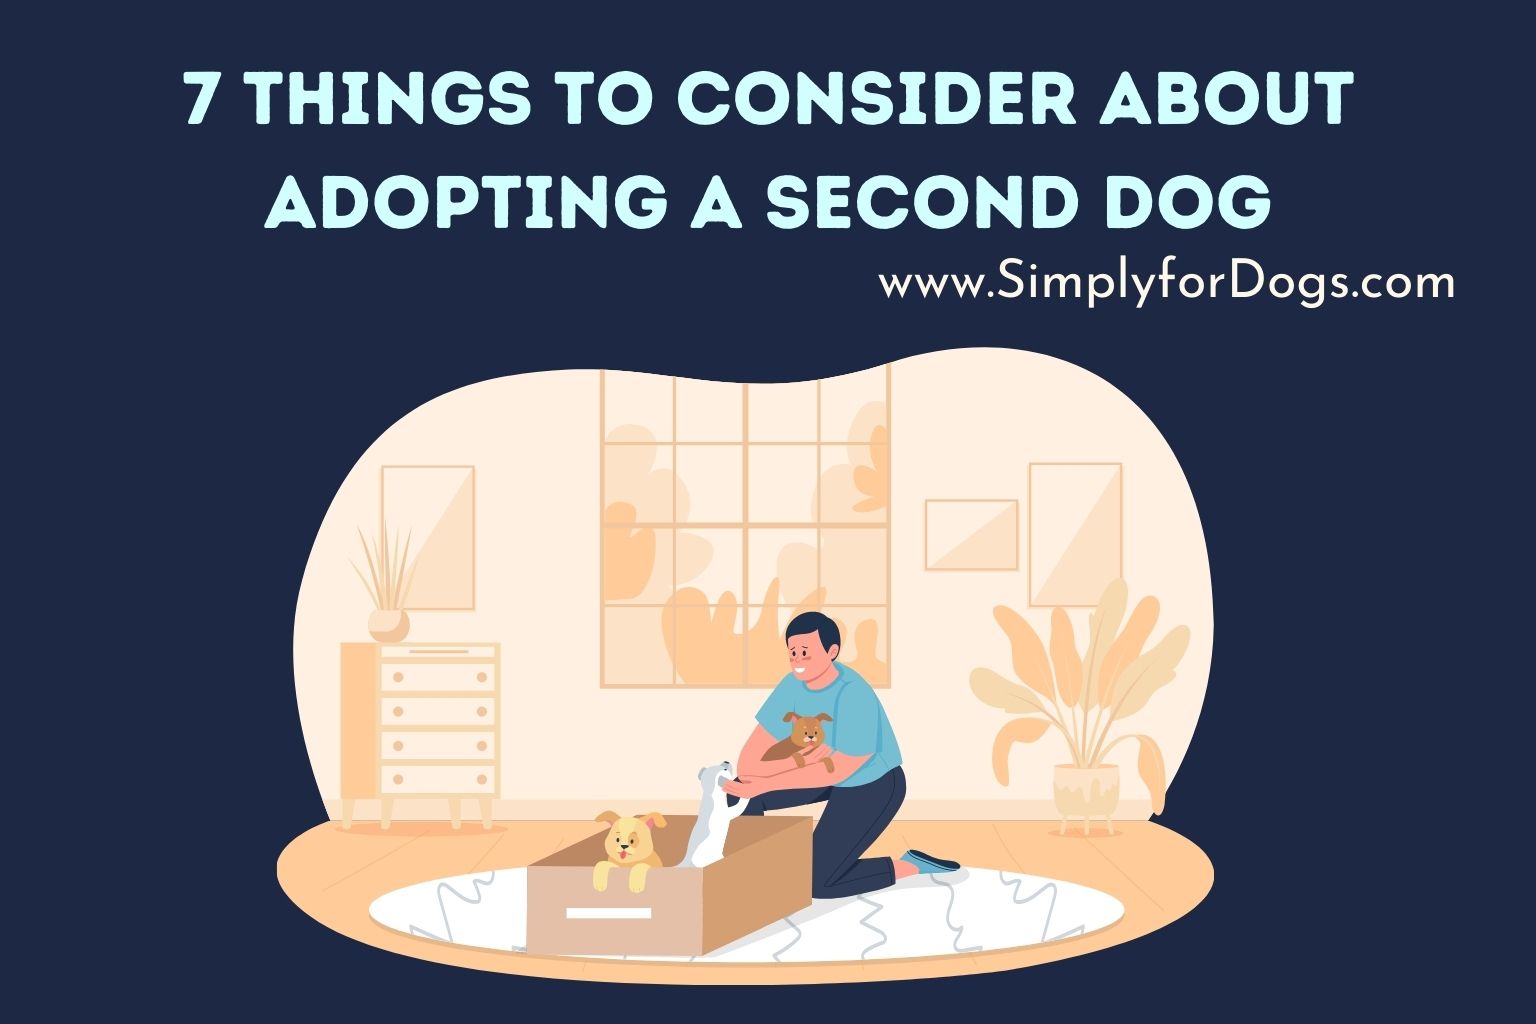 7 Things to Consider About Adopting a Second Dog